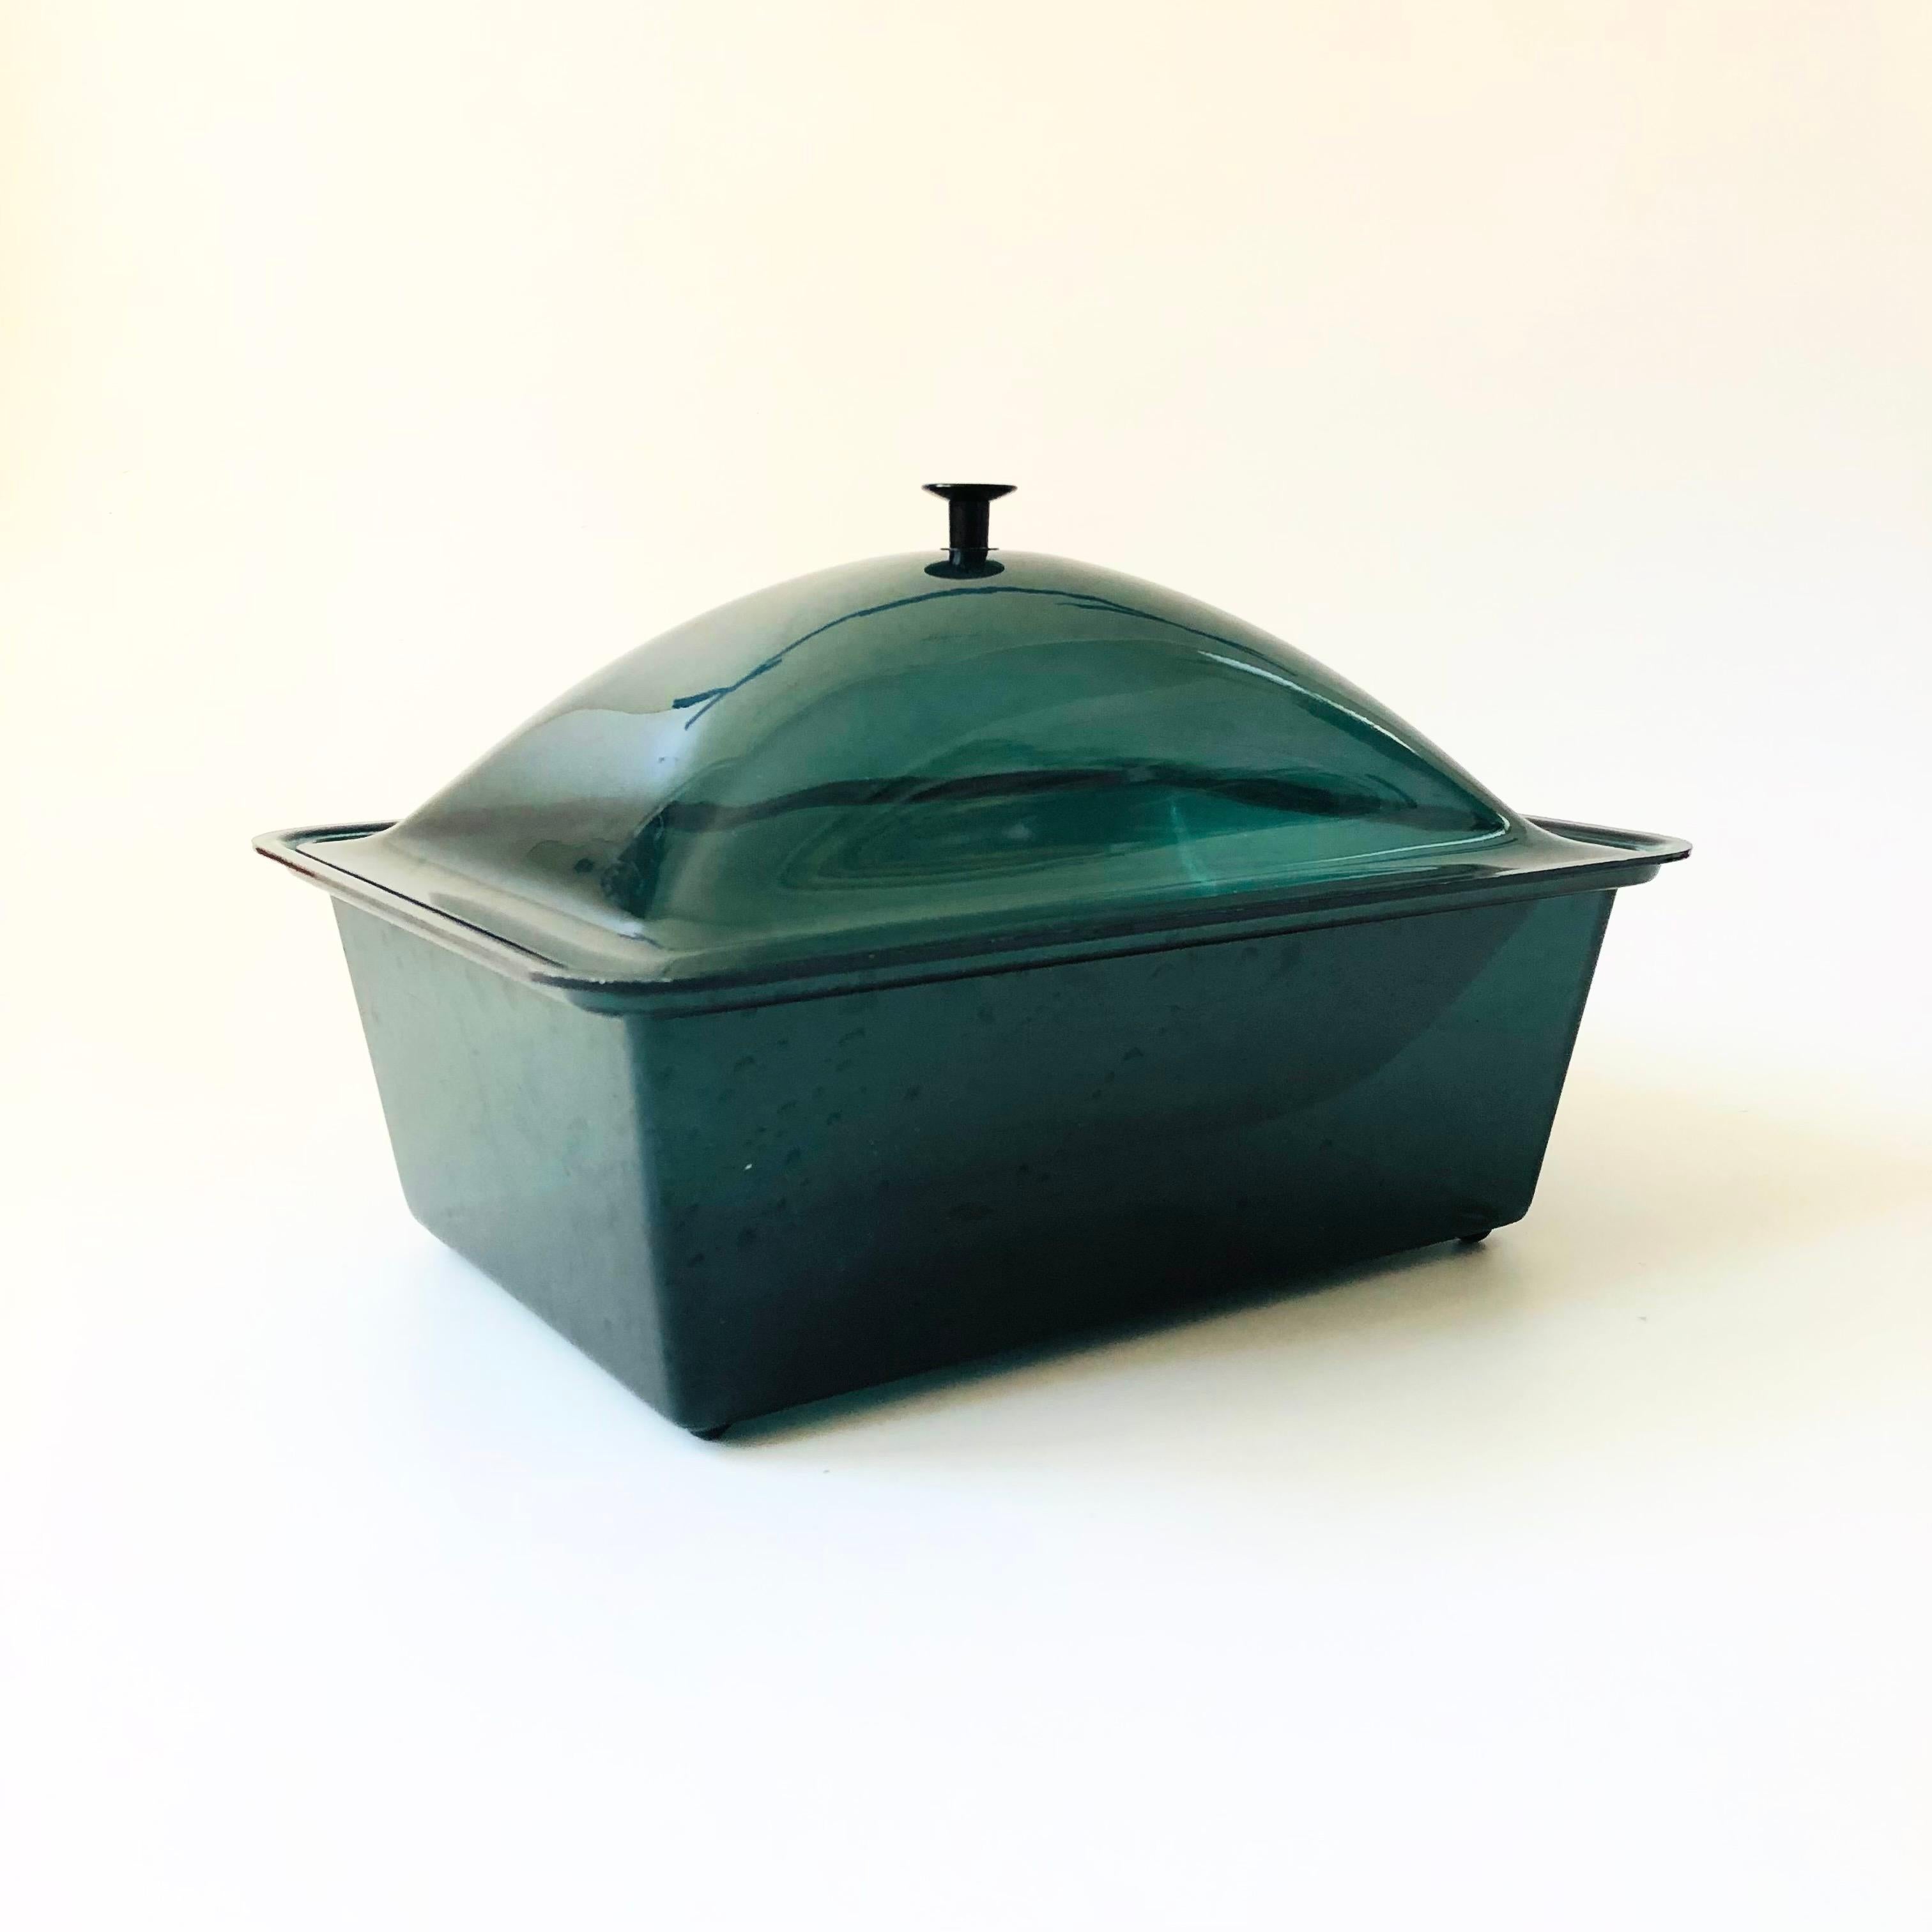 A great mid century acrylic server. Dark green tint to the acrylic with a white interior tray. Ice can be stored in the base for keeping dishes cold. Perfect for serving fruit, pasta salad, or other cold dishes.

